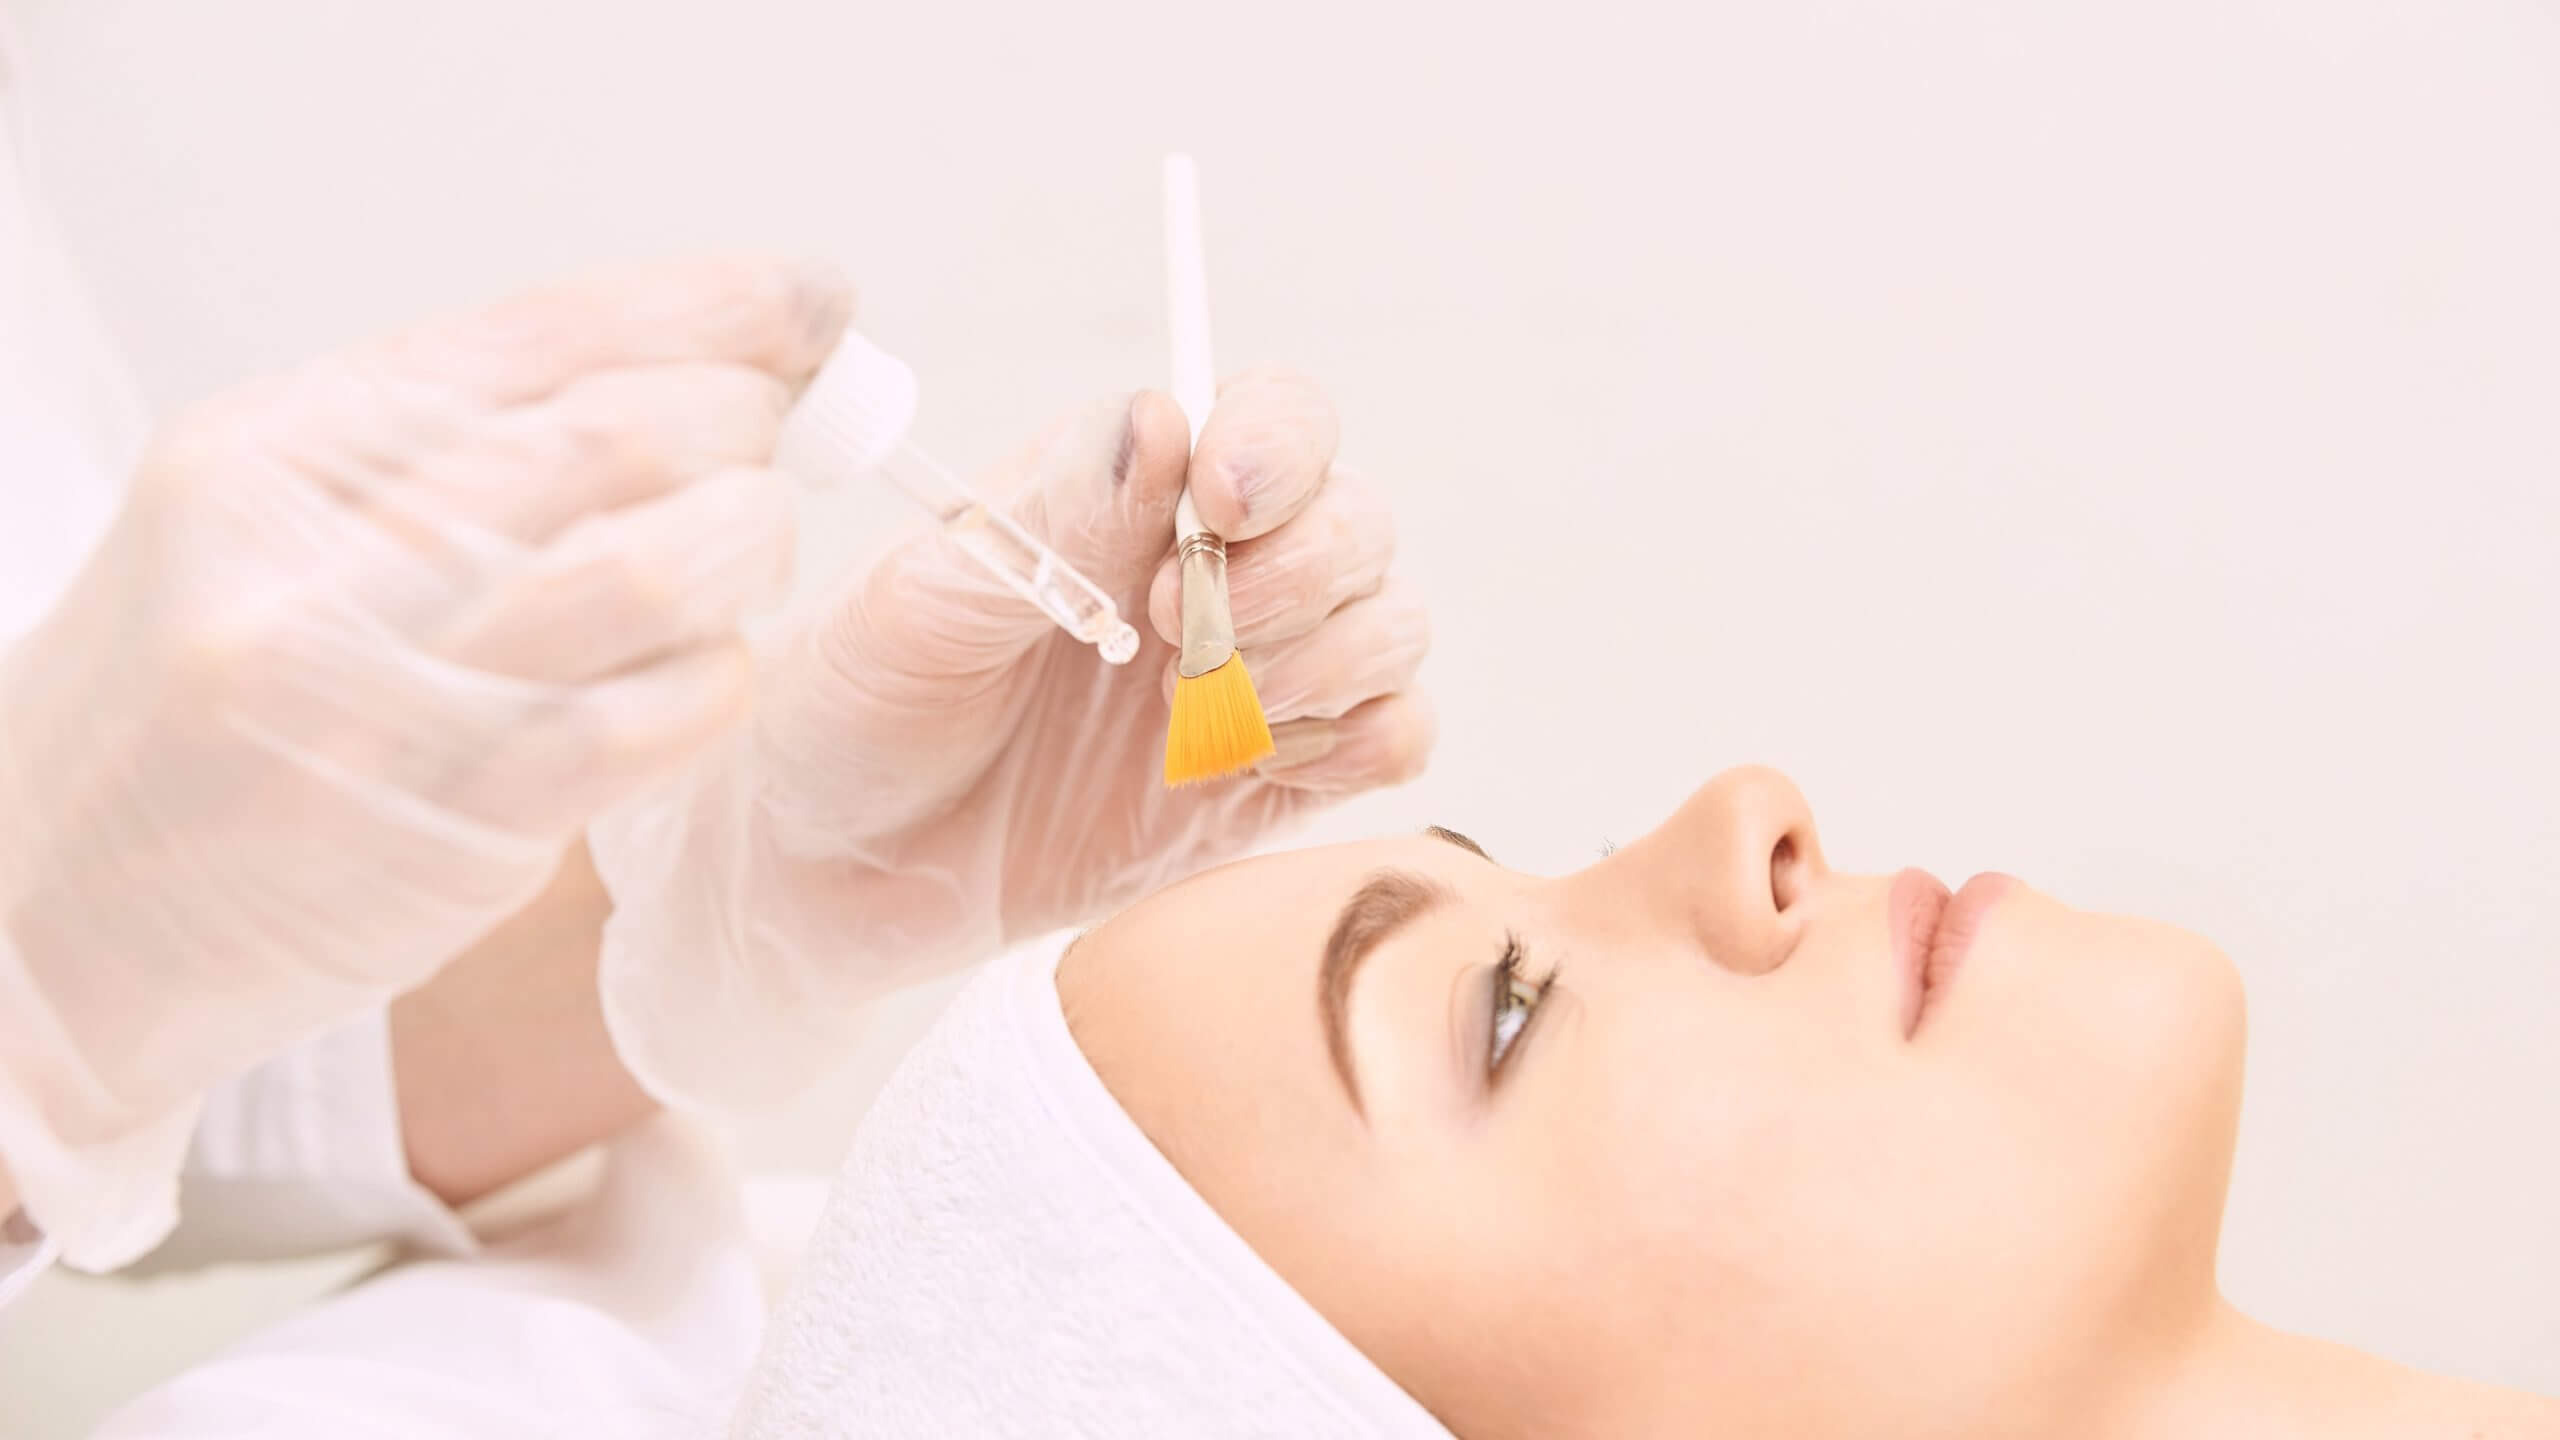 Keep your beauty! Beautiful woman getting skin cleaning and face Medical-Grade Chemical Peel treatment at beauty salon cosmetologist takes care of her face | Casa Glow Inc in East 22nd Street New York